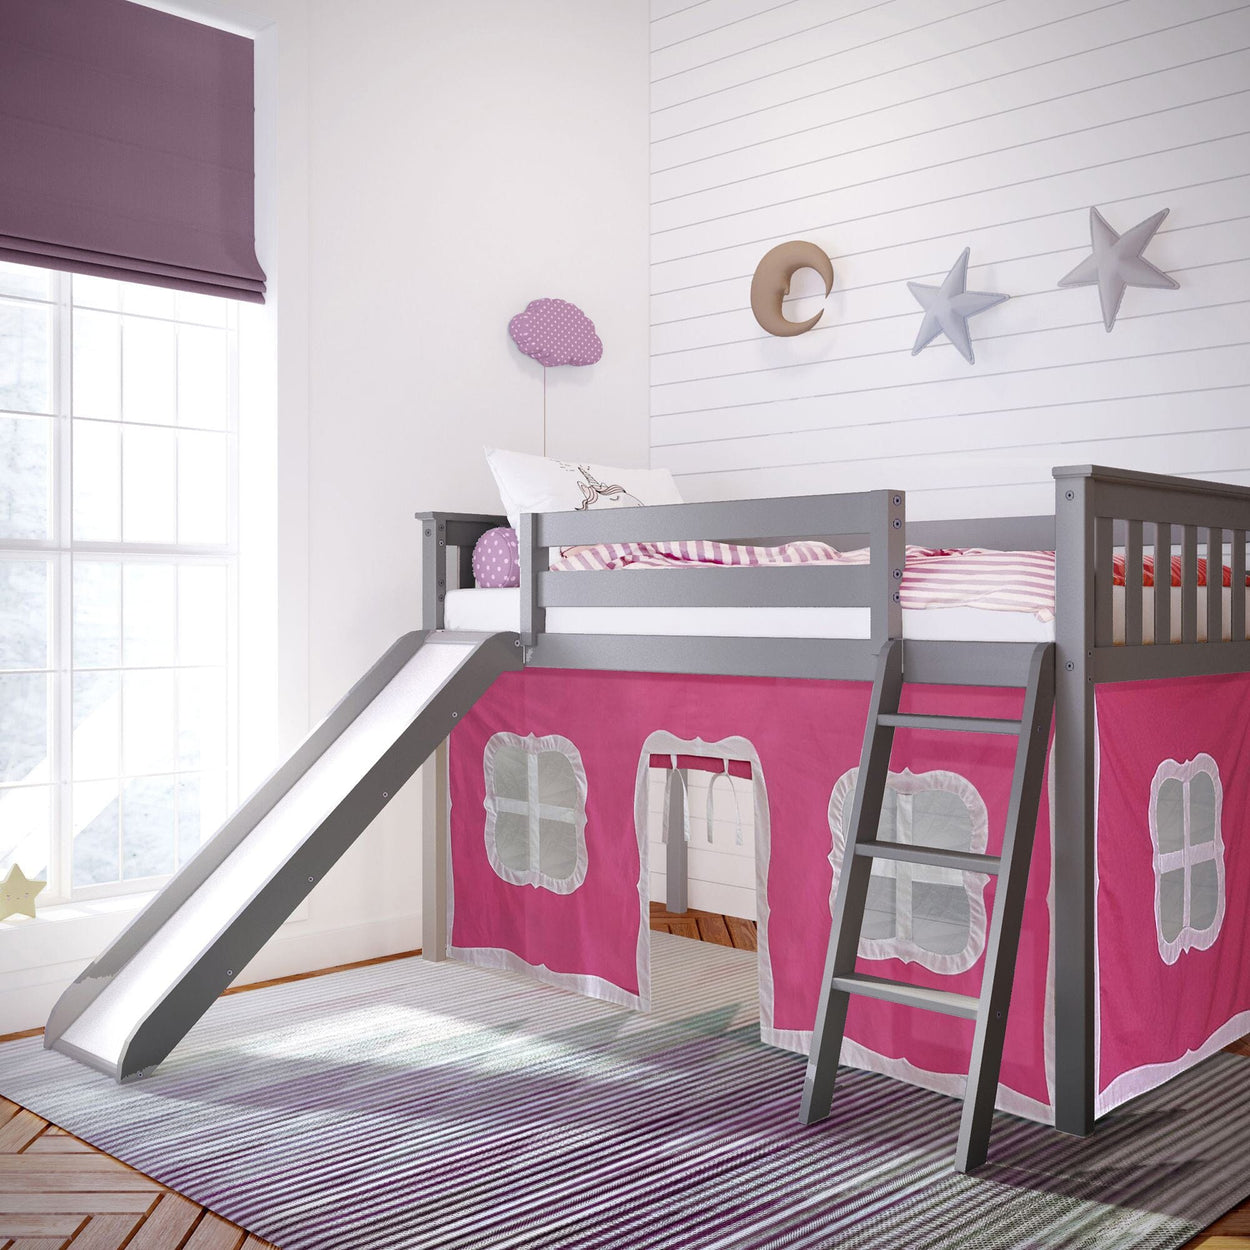 180213121078 : Loft Beds Twin-Size Low Loft with Slide with Curtain, Grey + Pink